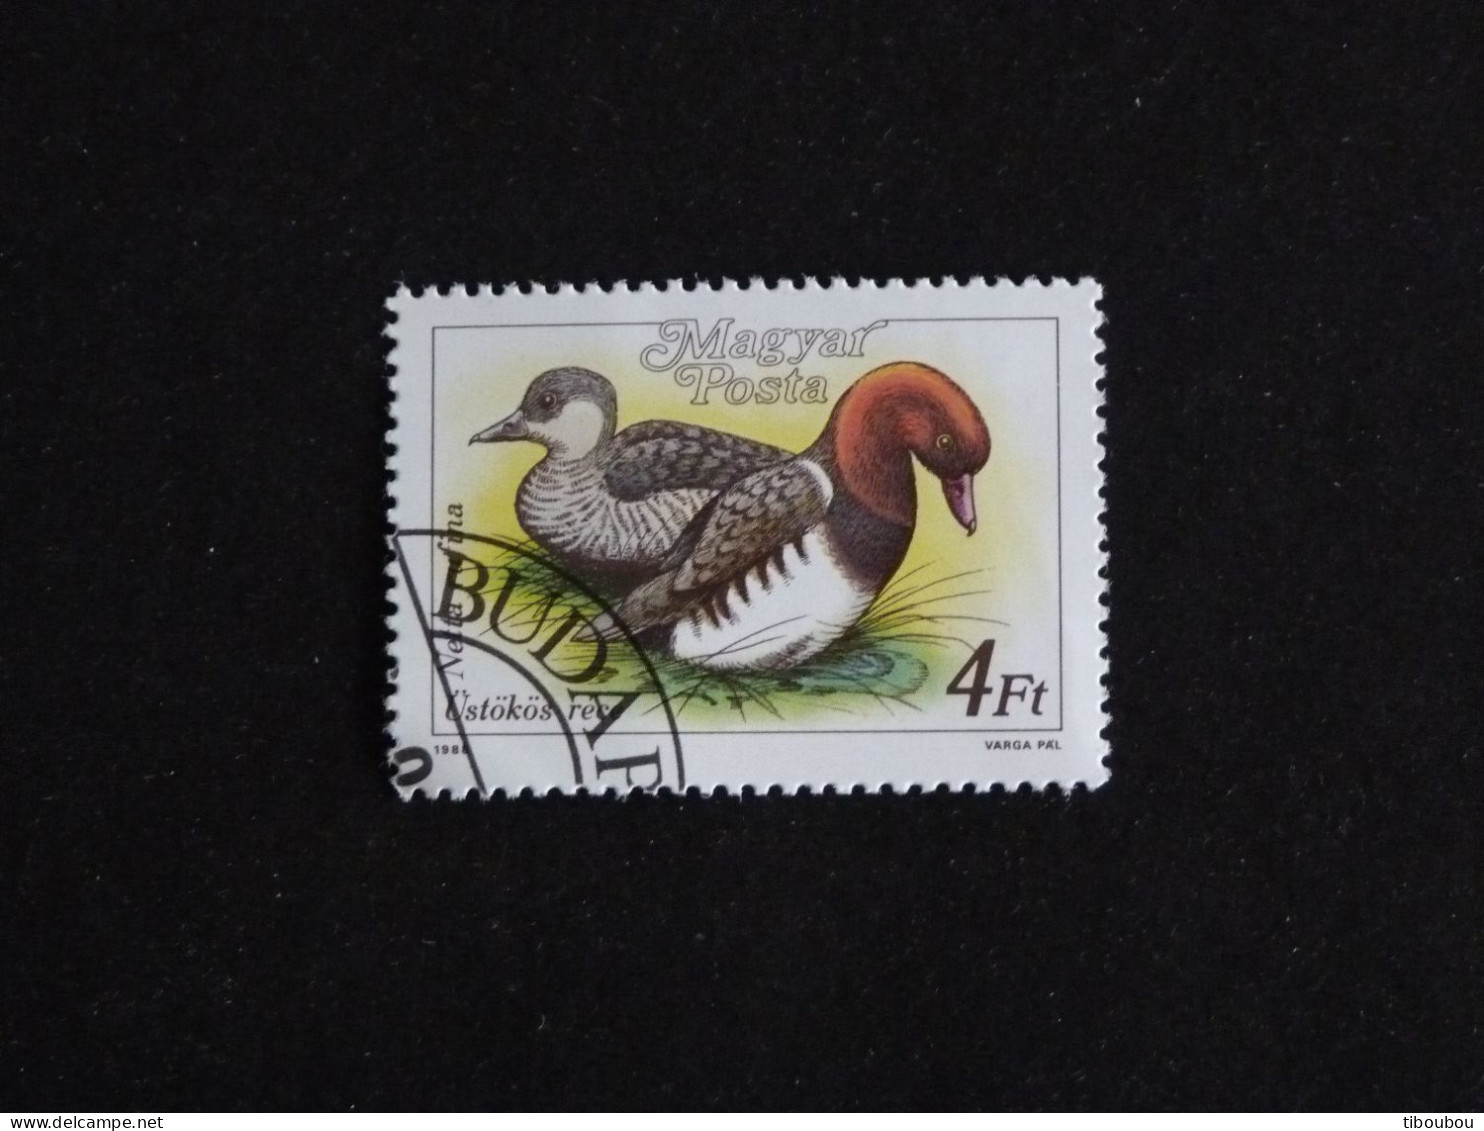 HONGRIE HUNGARY MAGYAR YT 3175 OBLITERE - CANARD DUCK / NETTE ROUSSE - Used Stamps